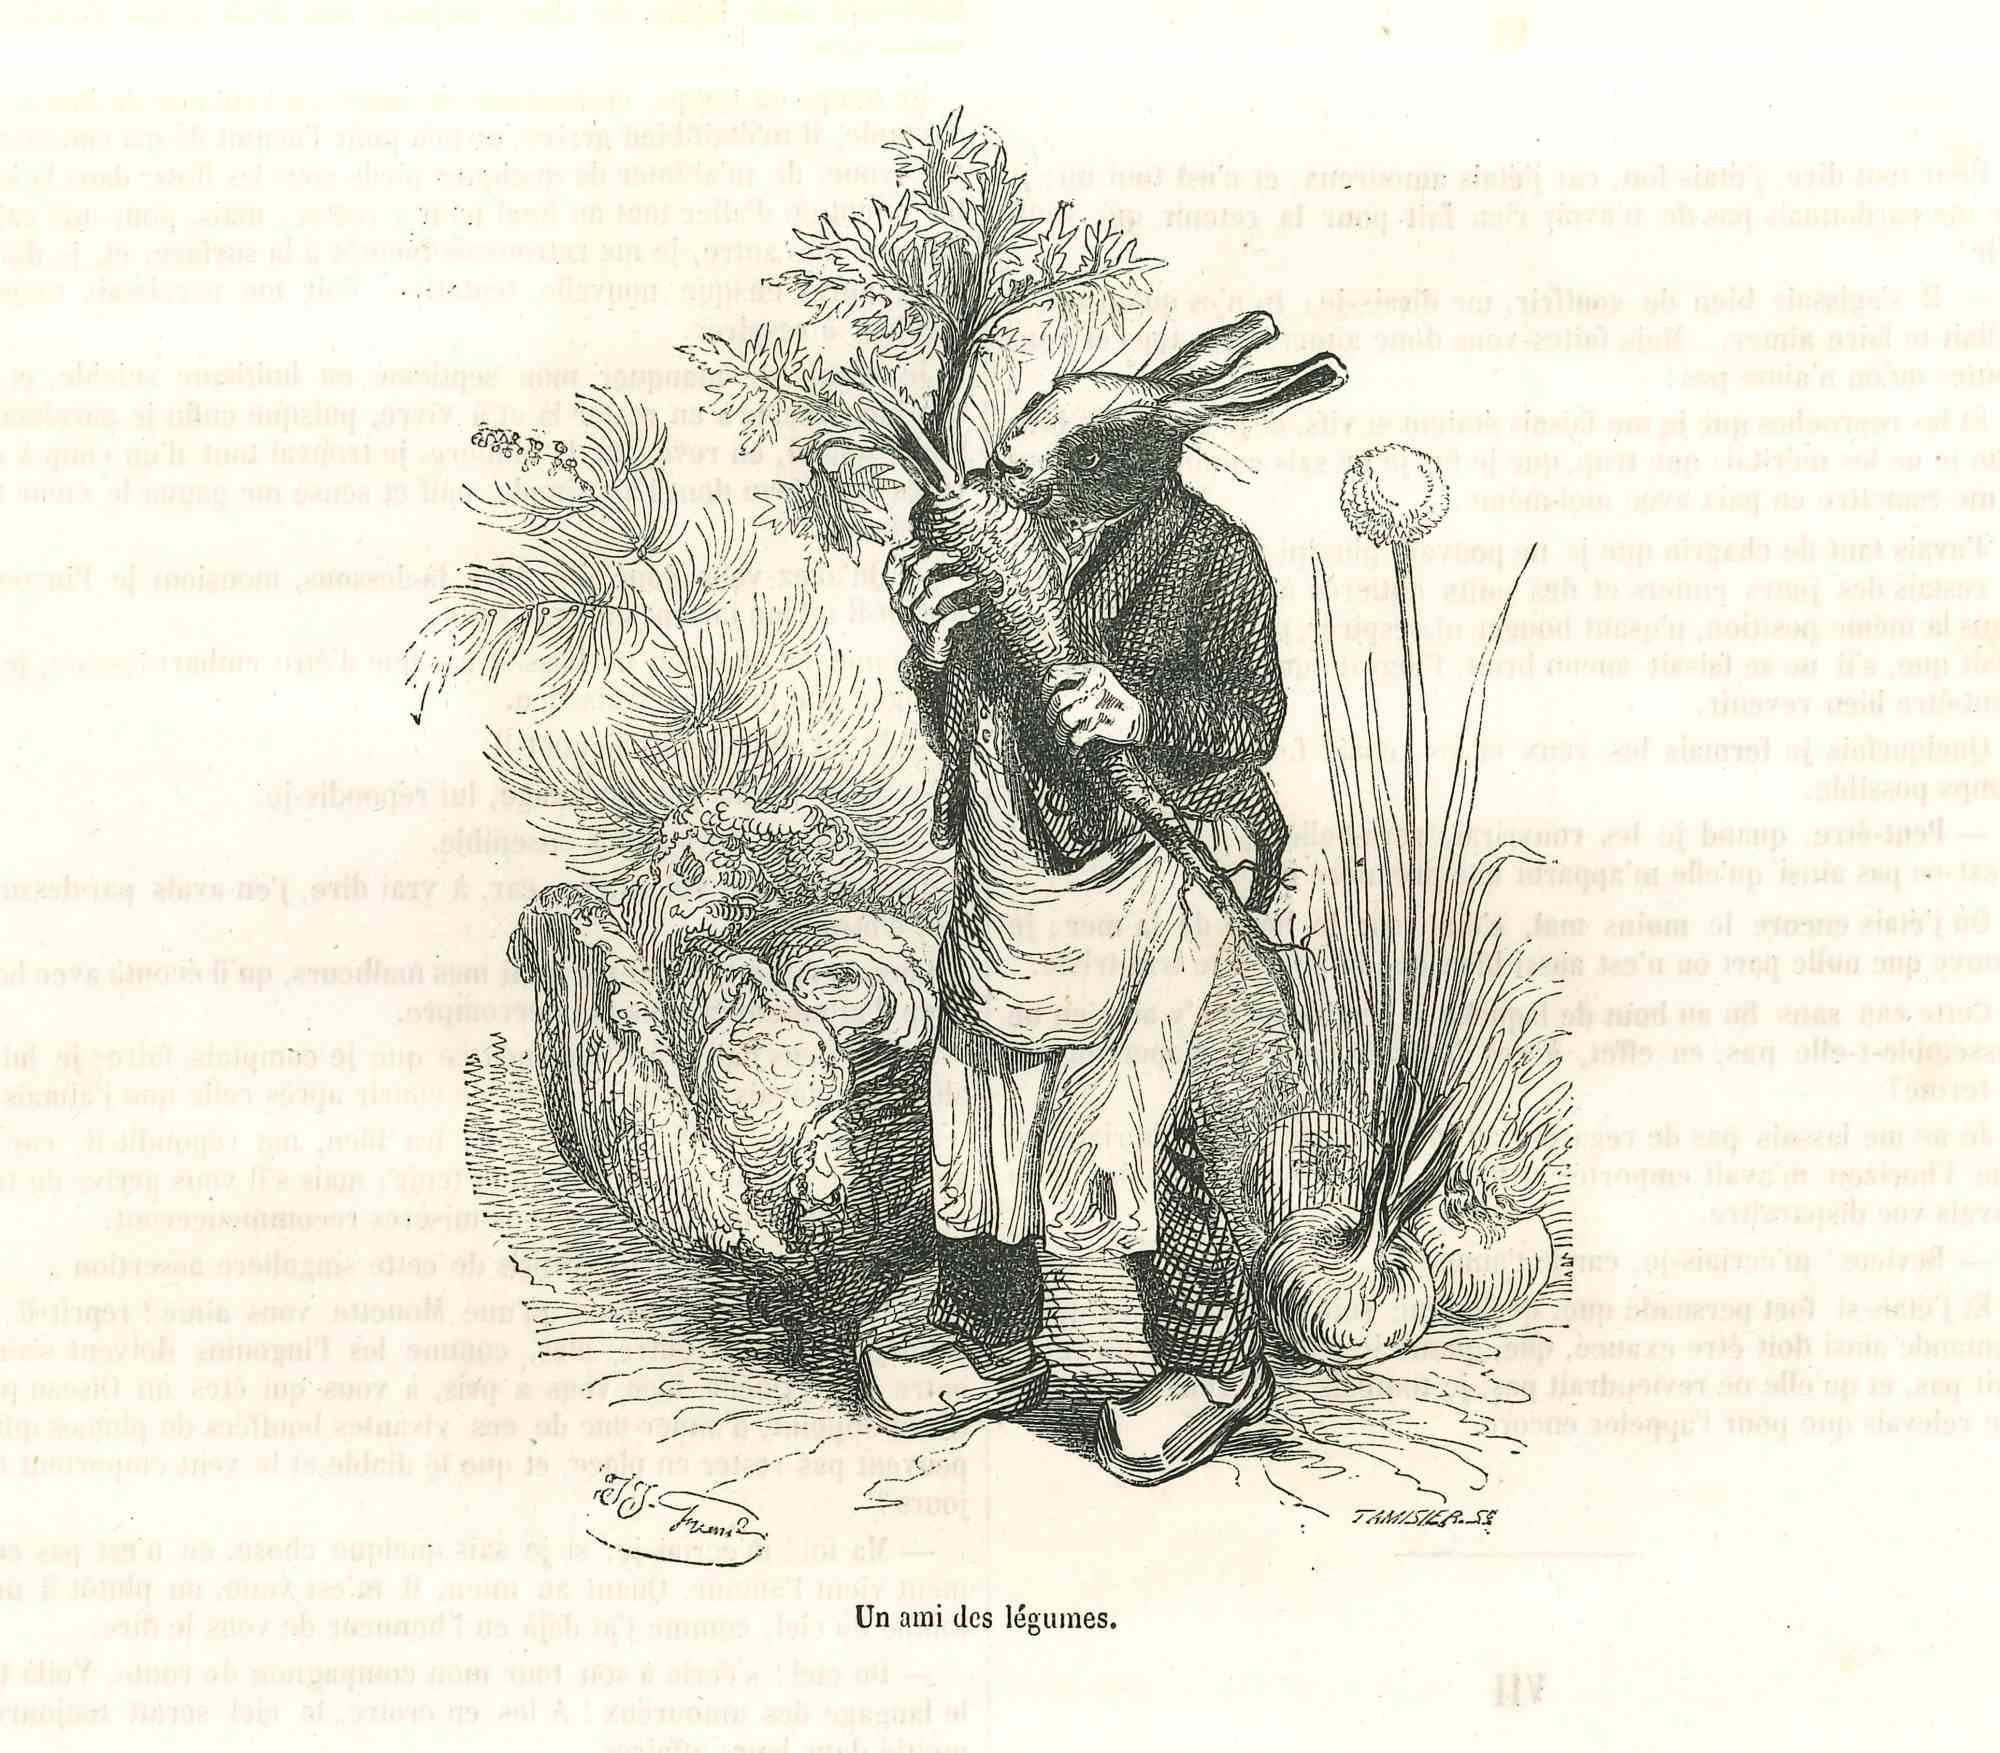 Mr. Bunny Eating A Big Carrot - Lithograph by J.J Grandville - 1852